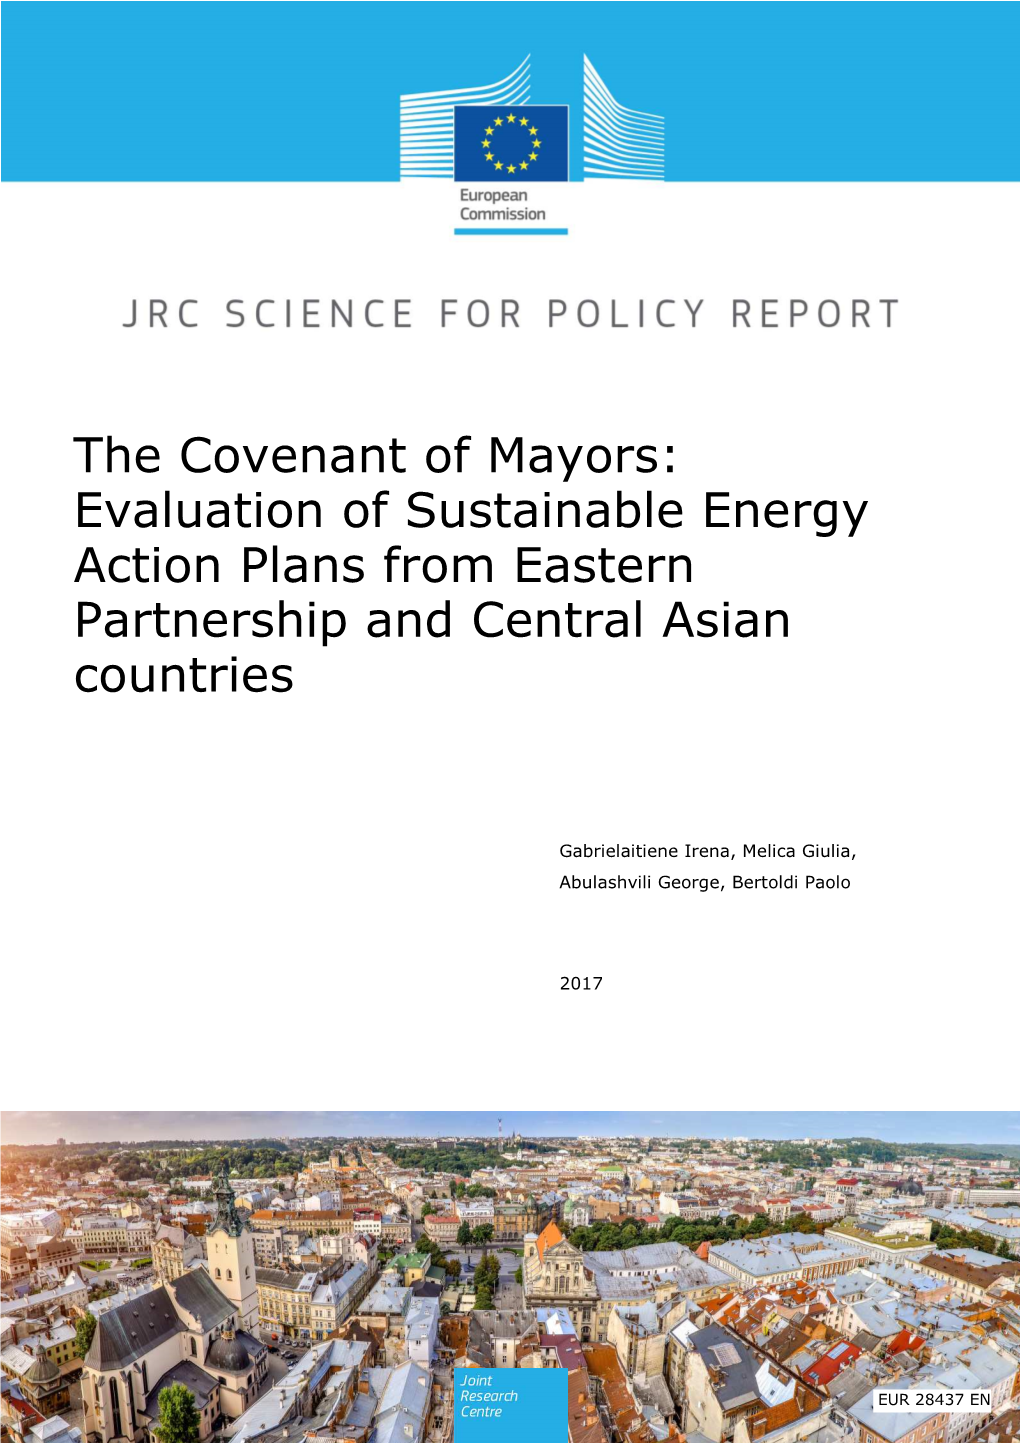 The Covenant of Mayors: Evaluation of Sustainable Energy Action Plans from Eastern Partnership and Central Asian Countries